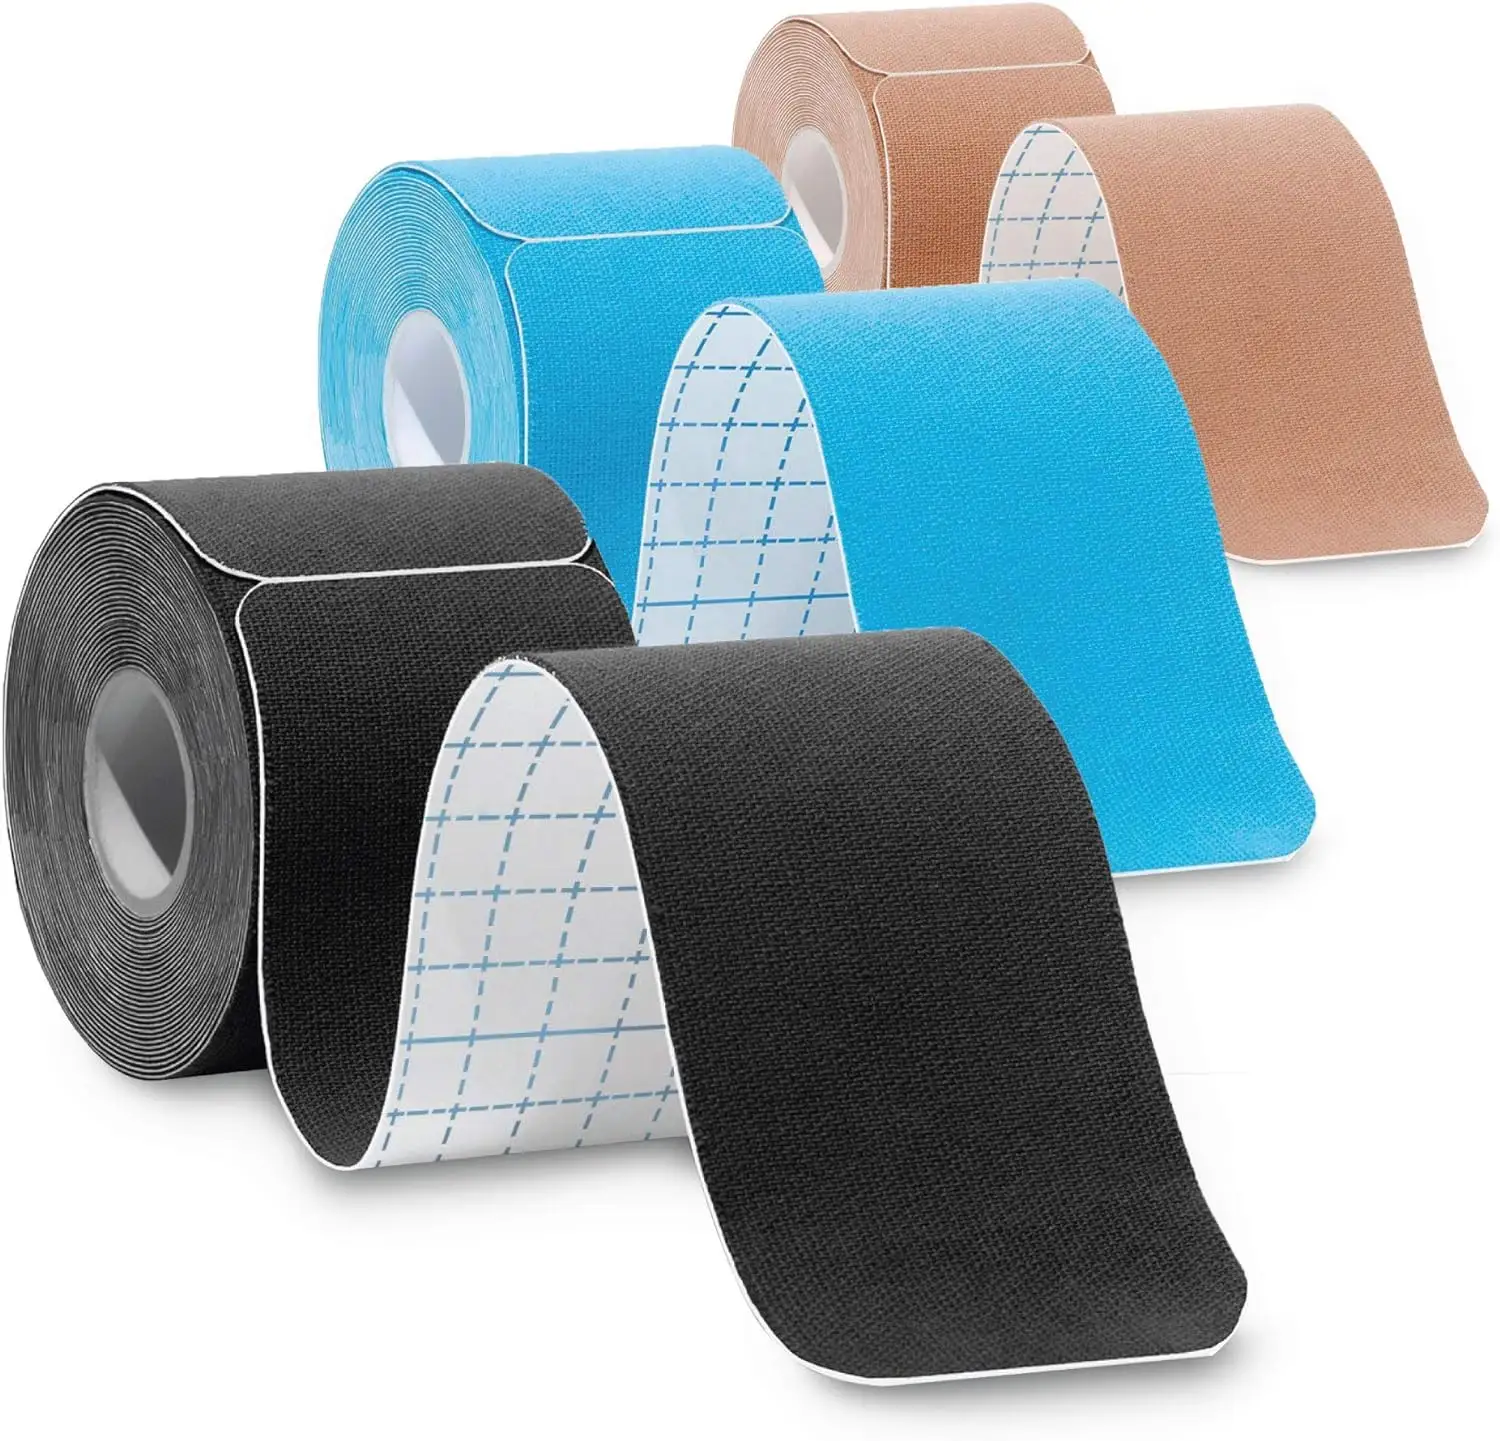 Kinesiology tape 11 colors 5cm x 5m Sports Cotton Elastic Adhesive Muscle coloured Bandage Strain Injury Support